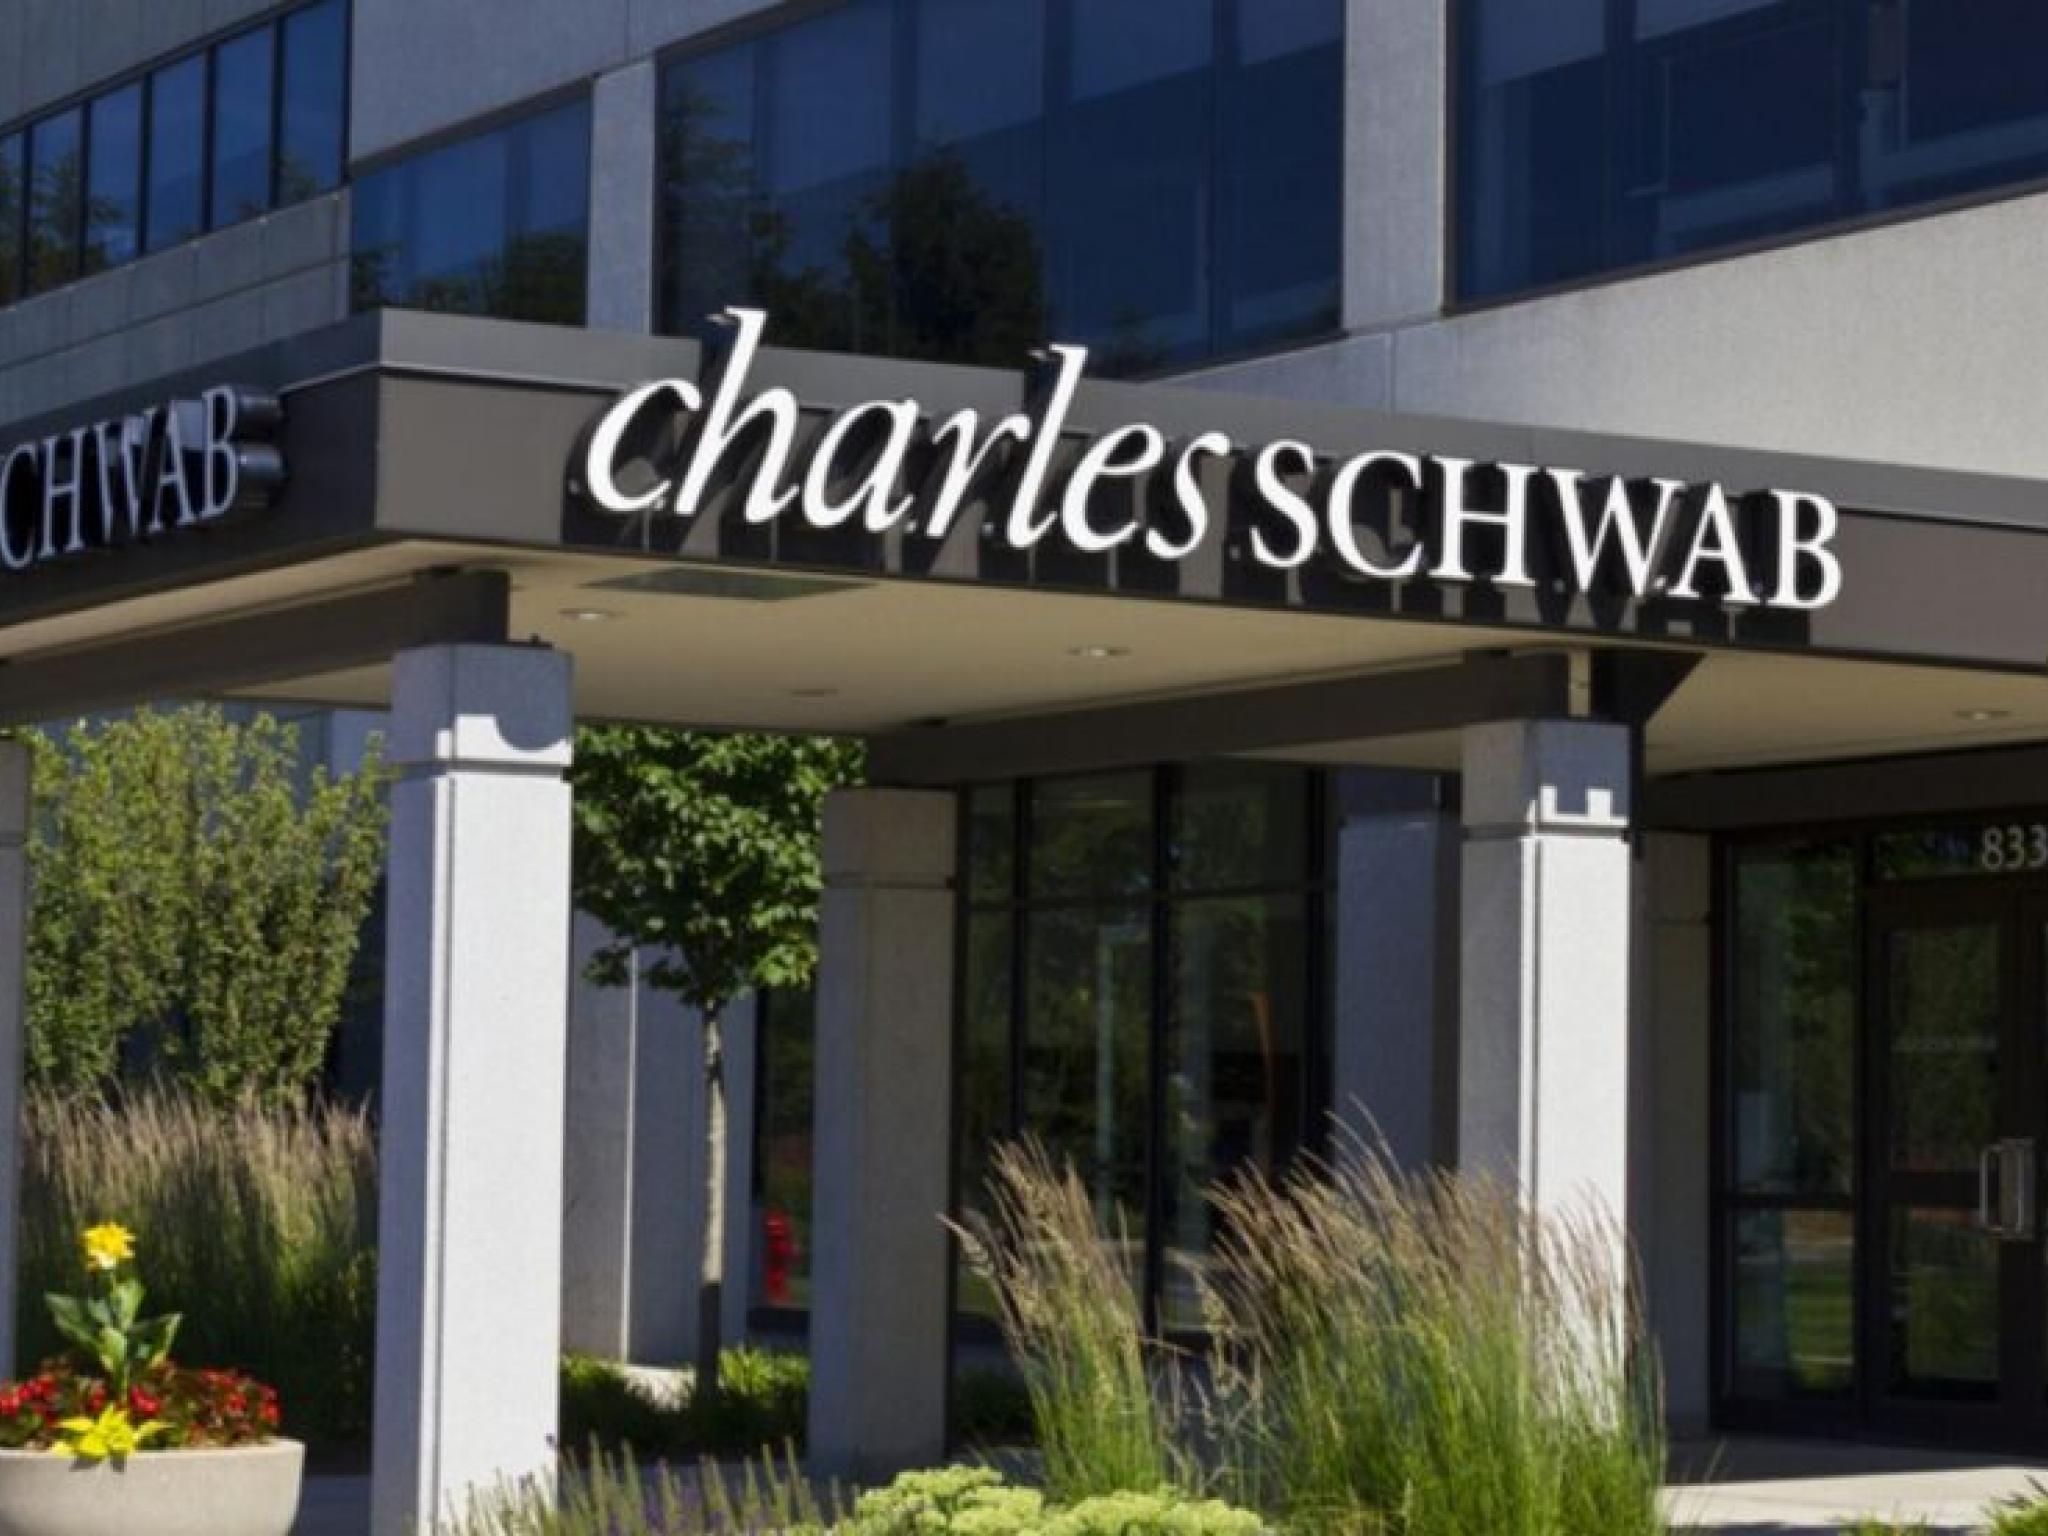  why-charles-schwab-shares-are-trading-lower-by-over-7-here-are-other-stocks-moving-in-tuesdays-mid-day-session 